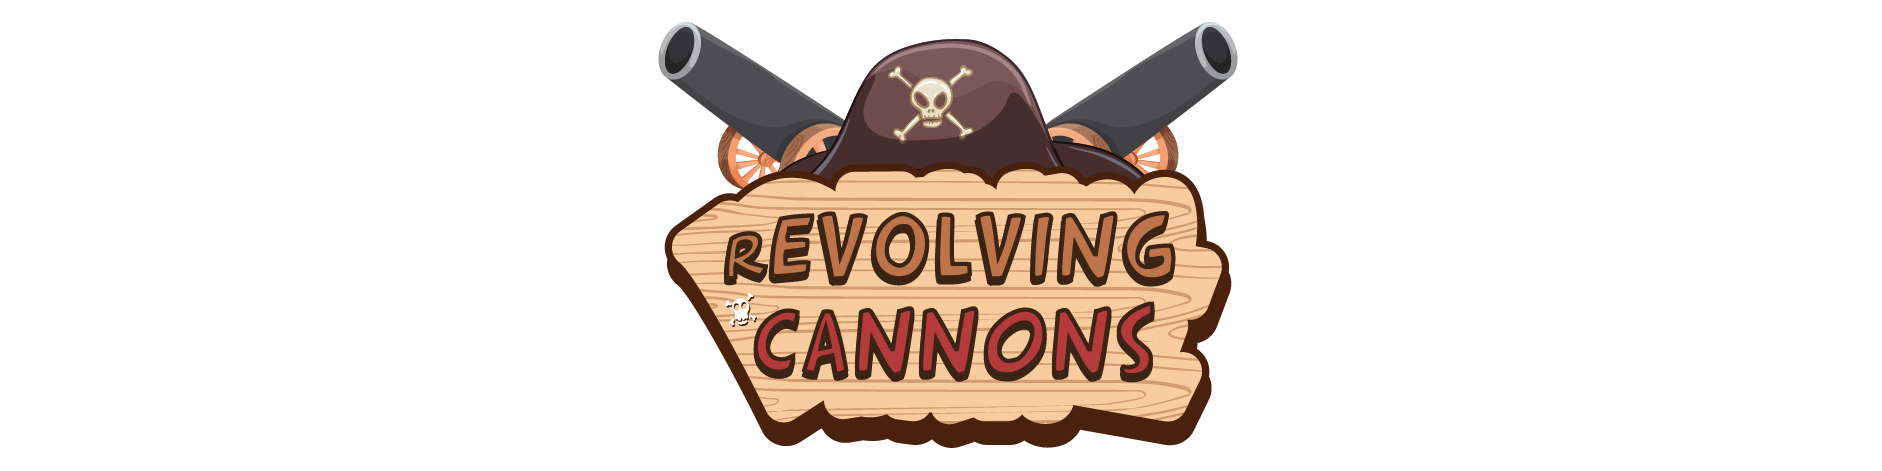 rEVOLVING CANNONS